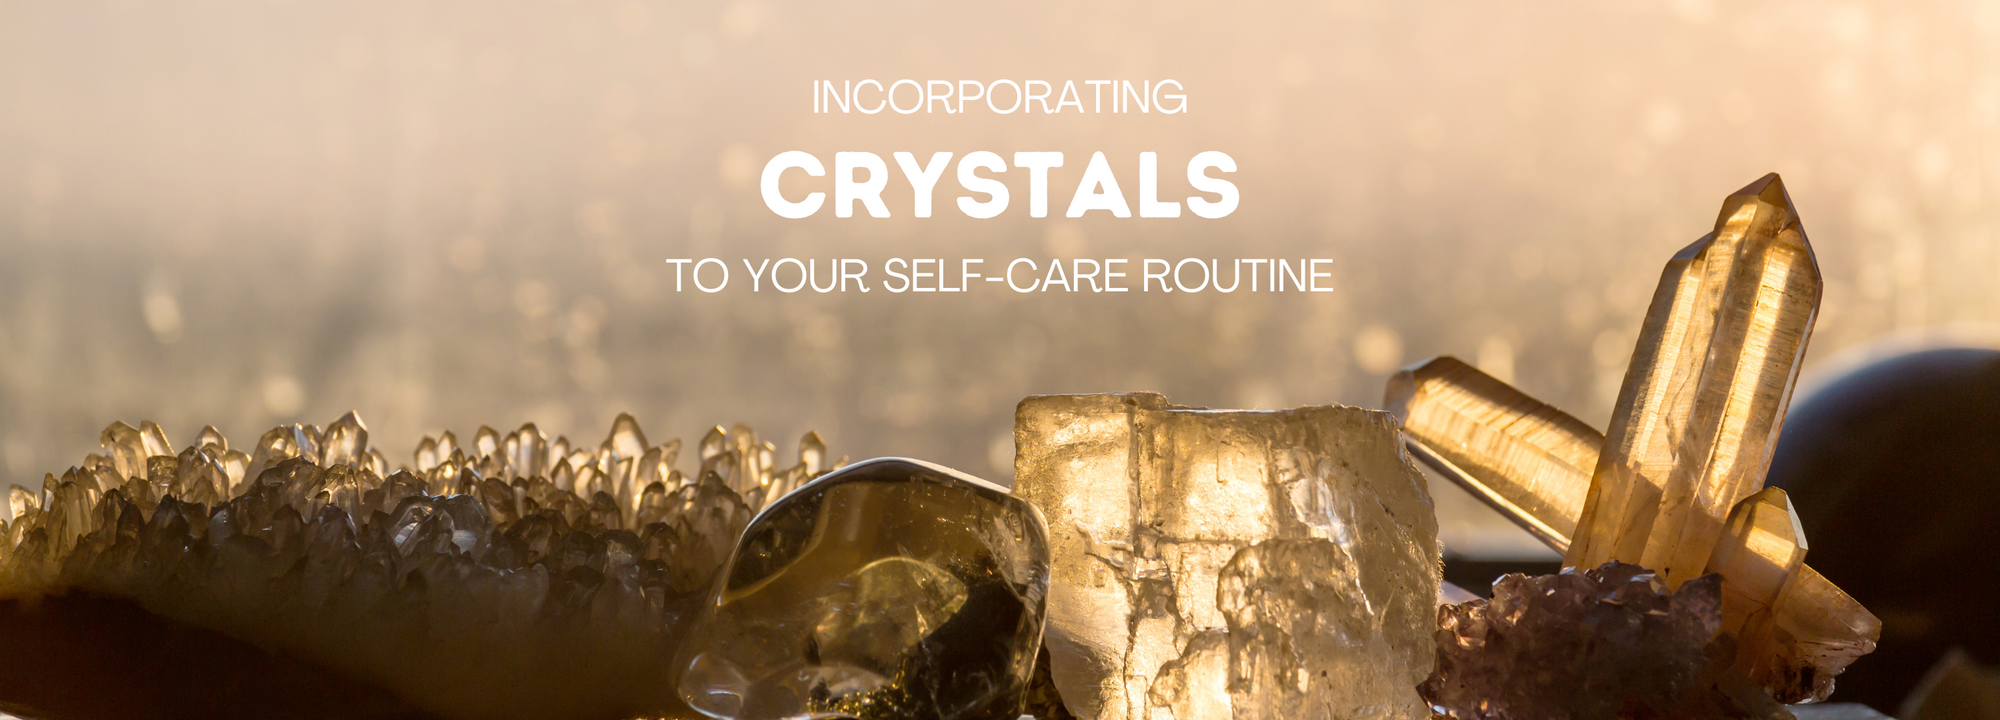 Incorporating Crystals To Your Self-Care Routine